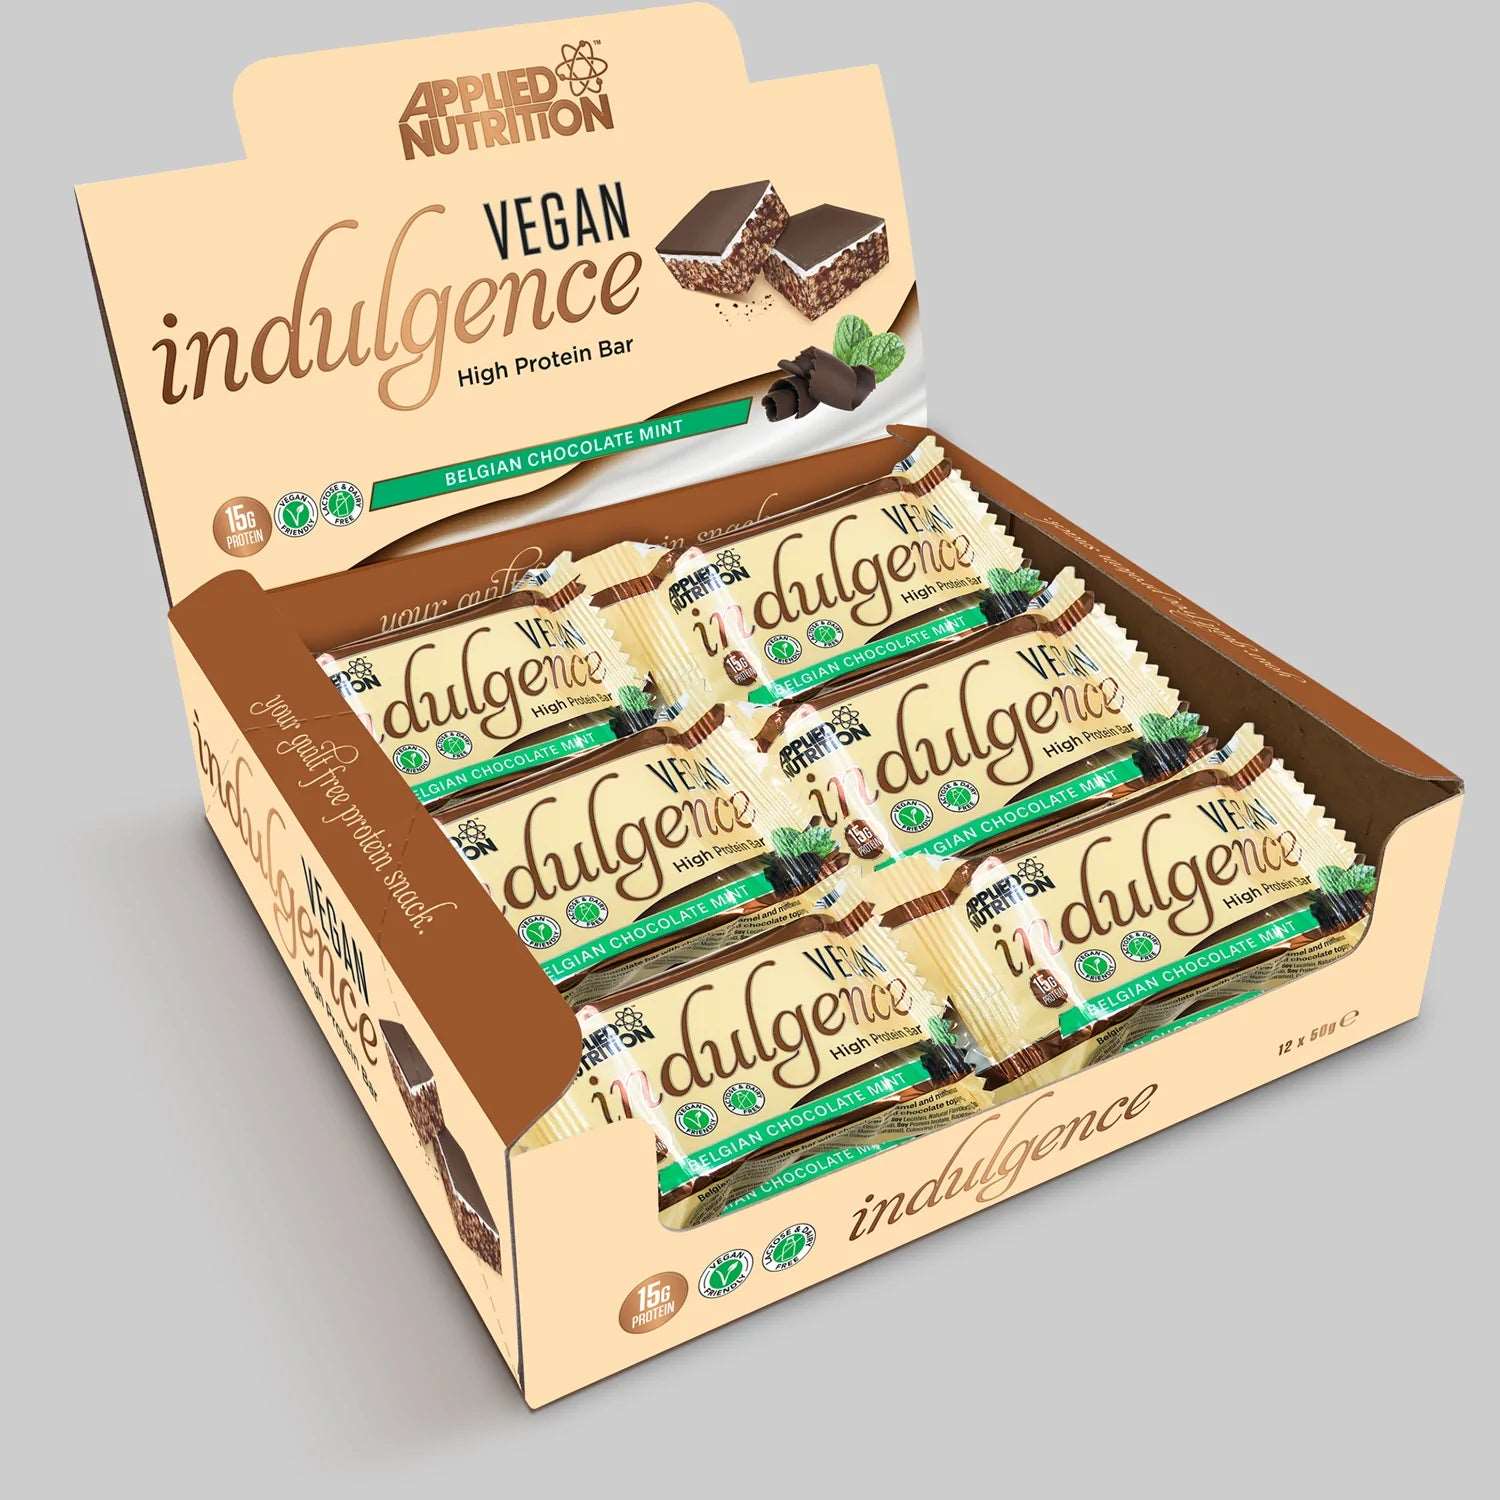 Applied Nutrition Vegan Indulgence Protein Bar (1 BOX of 12) copy-of-applied-nutrition-vegan-indulgence-bar-1-box-of-12 Protein Snacks Belgian Chocolate Mint BEST BY JULY 21, 2023 Applied Nutrition